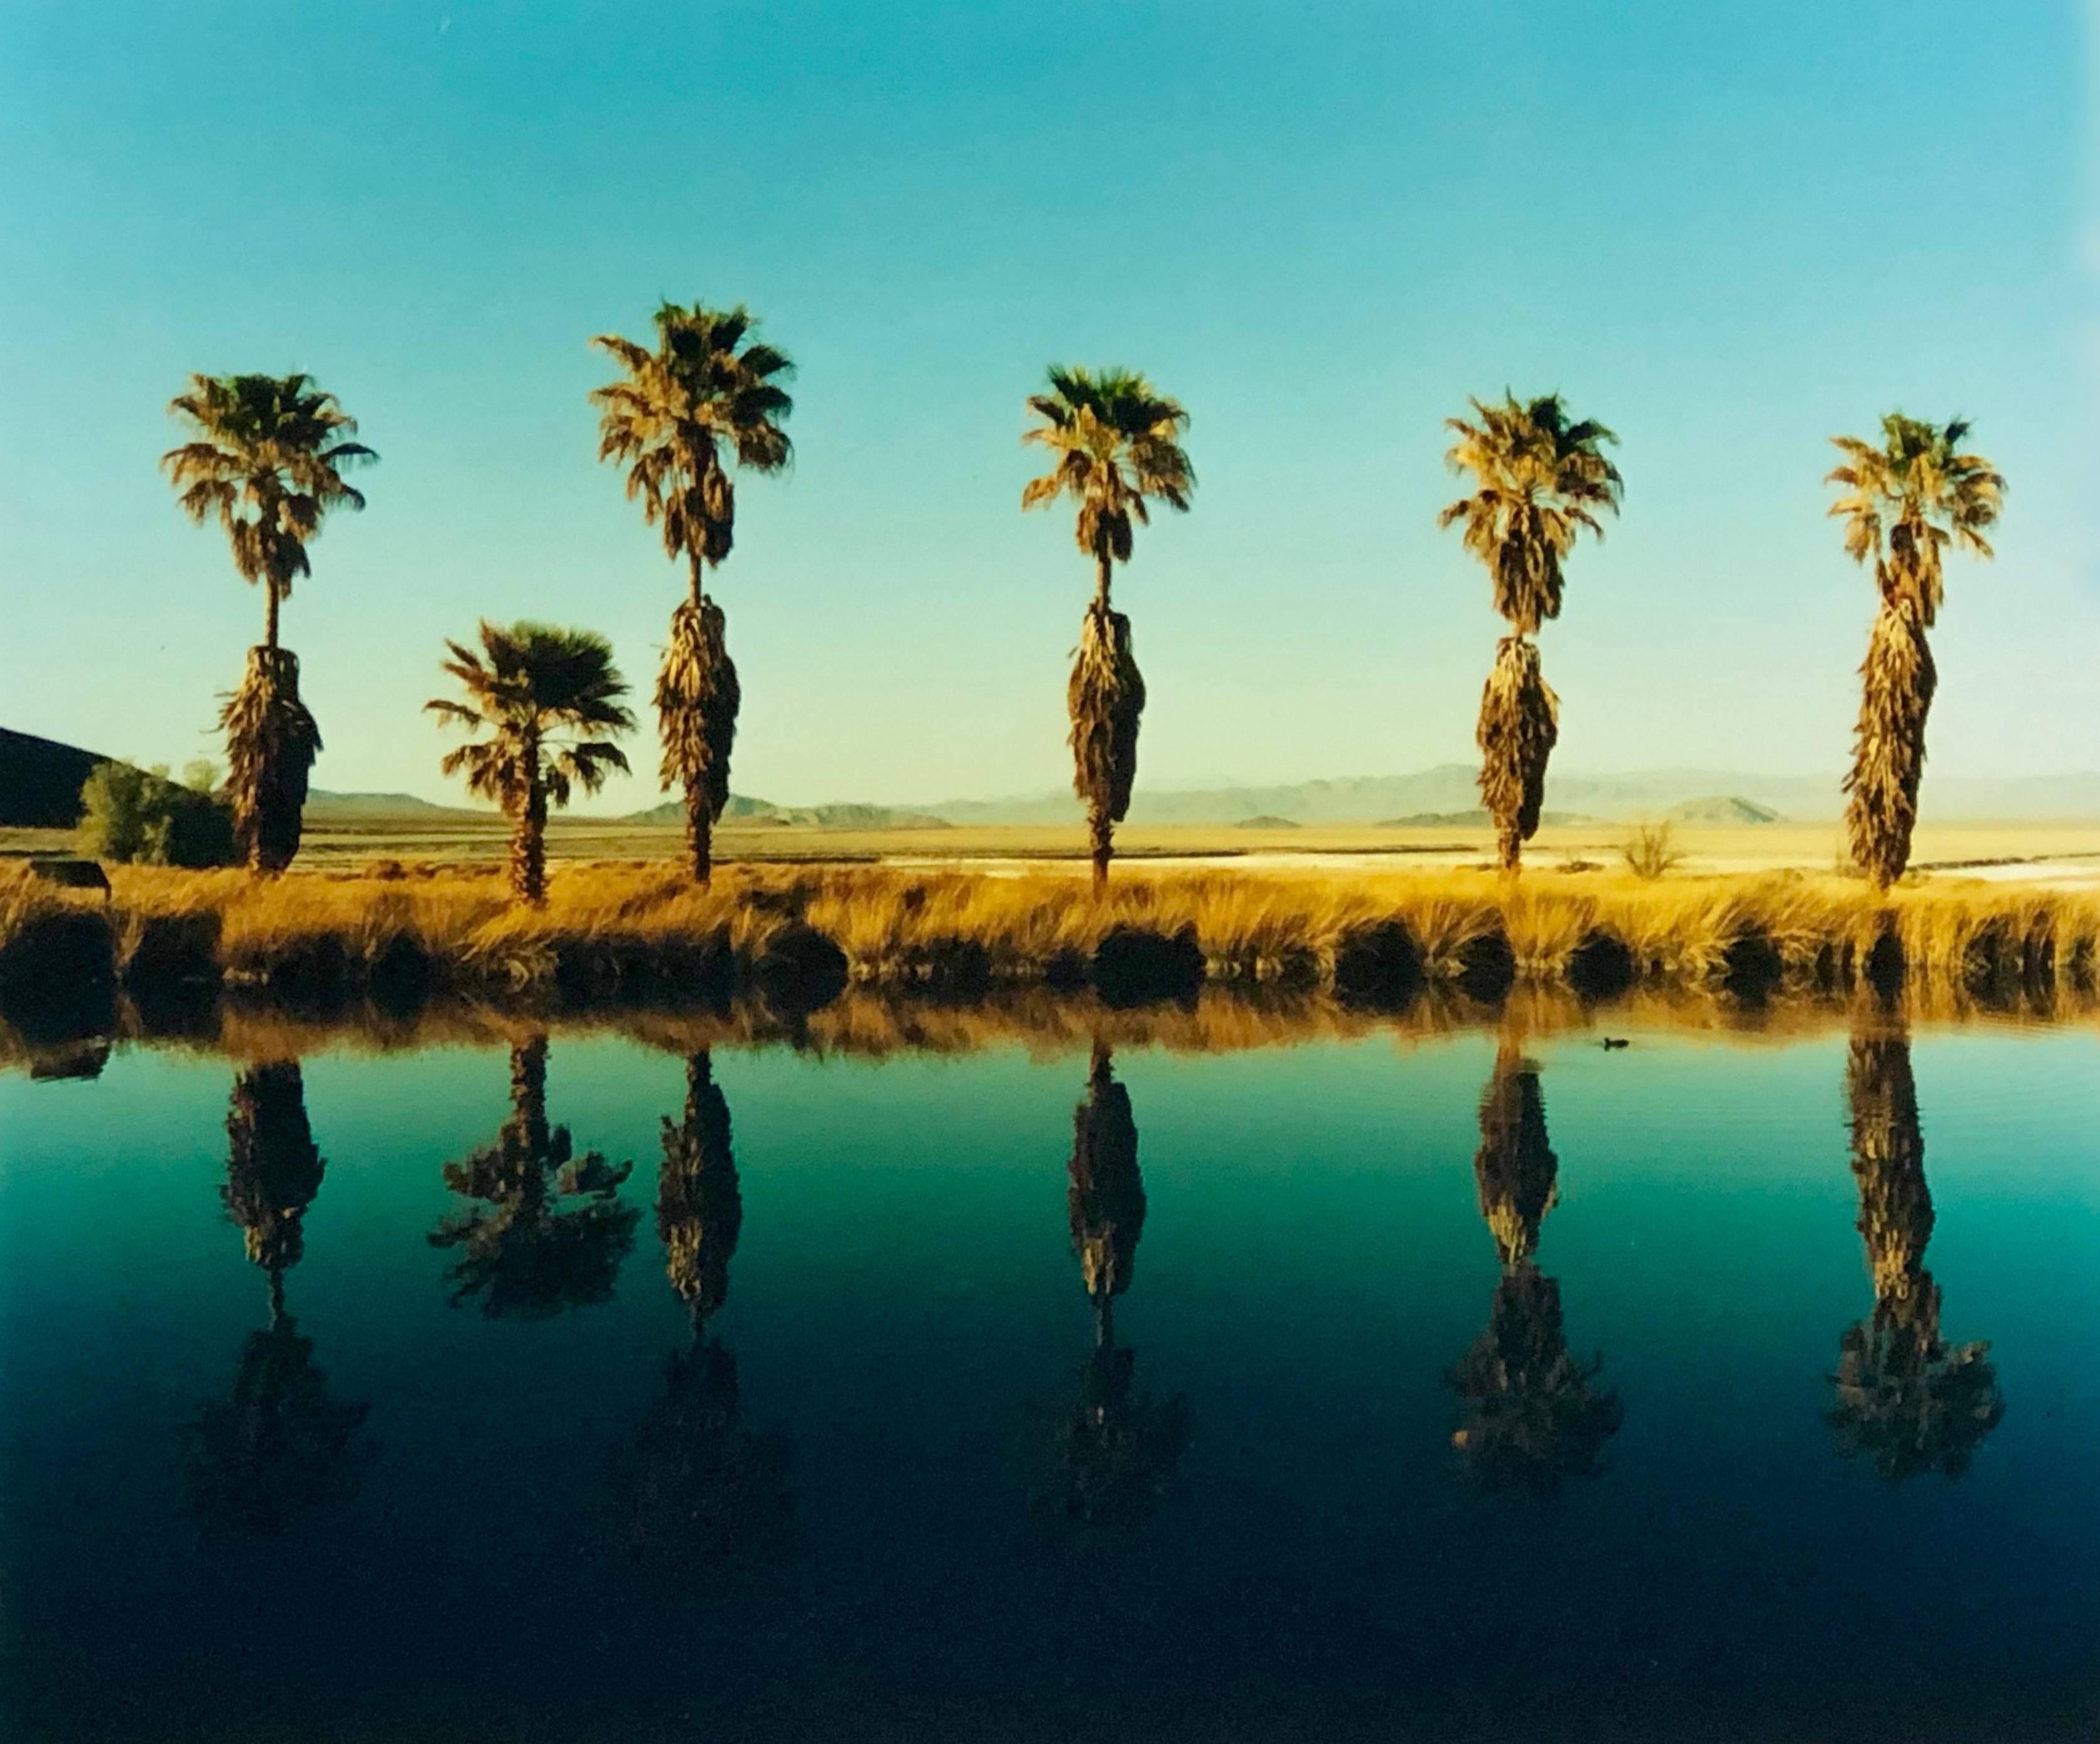 Part of Richard Heeps 'Dream in Colour' Series, he was set a challenge to find something interesting on the road from LA to Las Vegas. In the heart of the Mojave Desert, Richard found the former spa Zzyzx, an oasis. This dreamy shot brings the